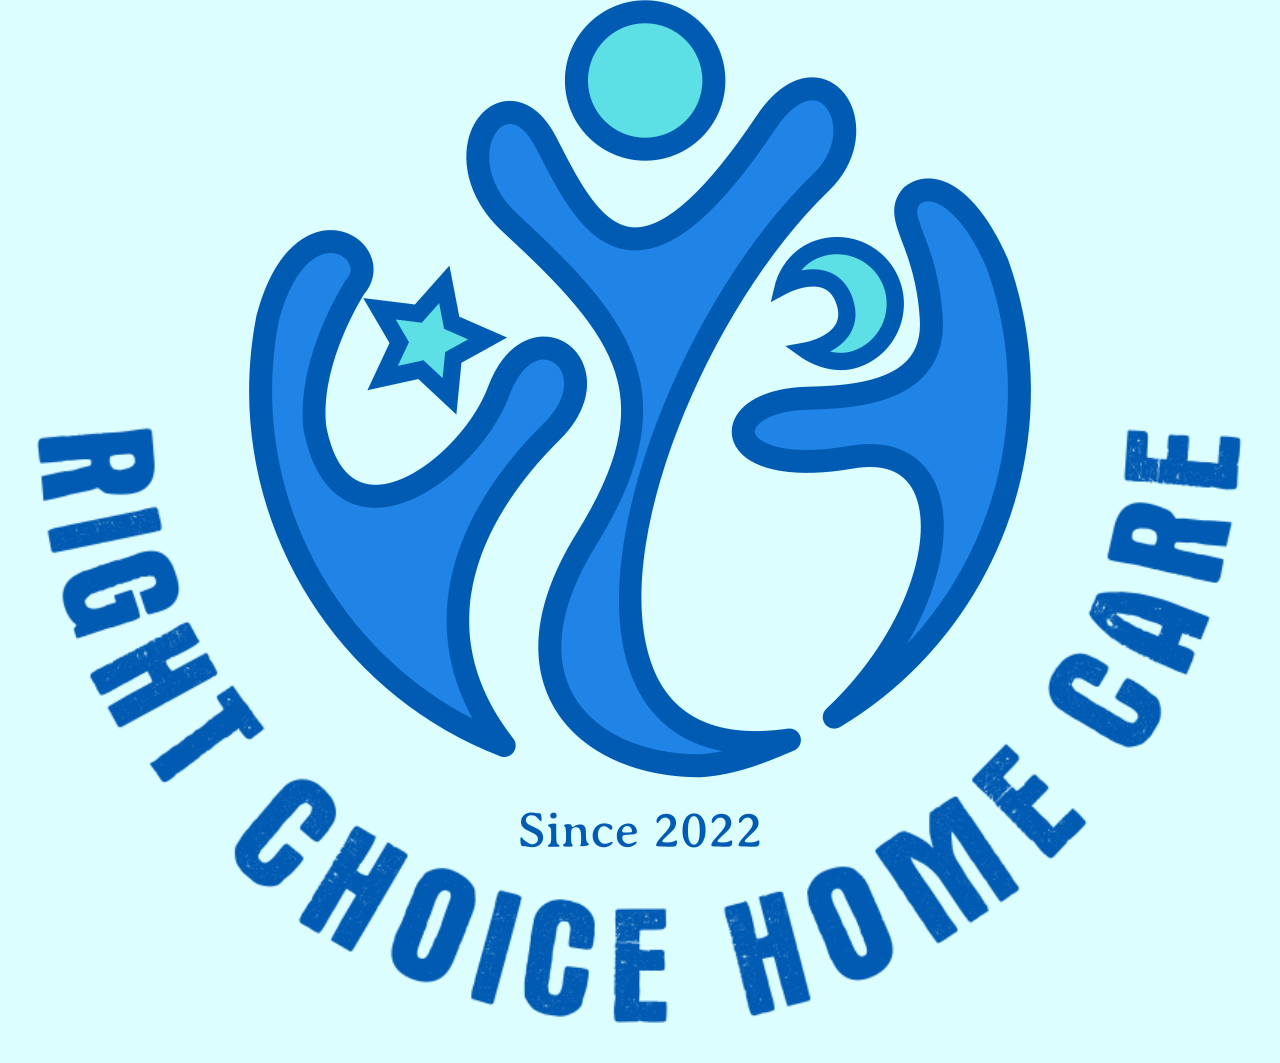 RIGHT CHOICE HOME CARE's web page